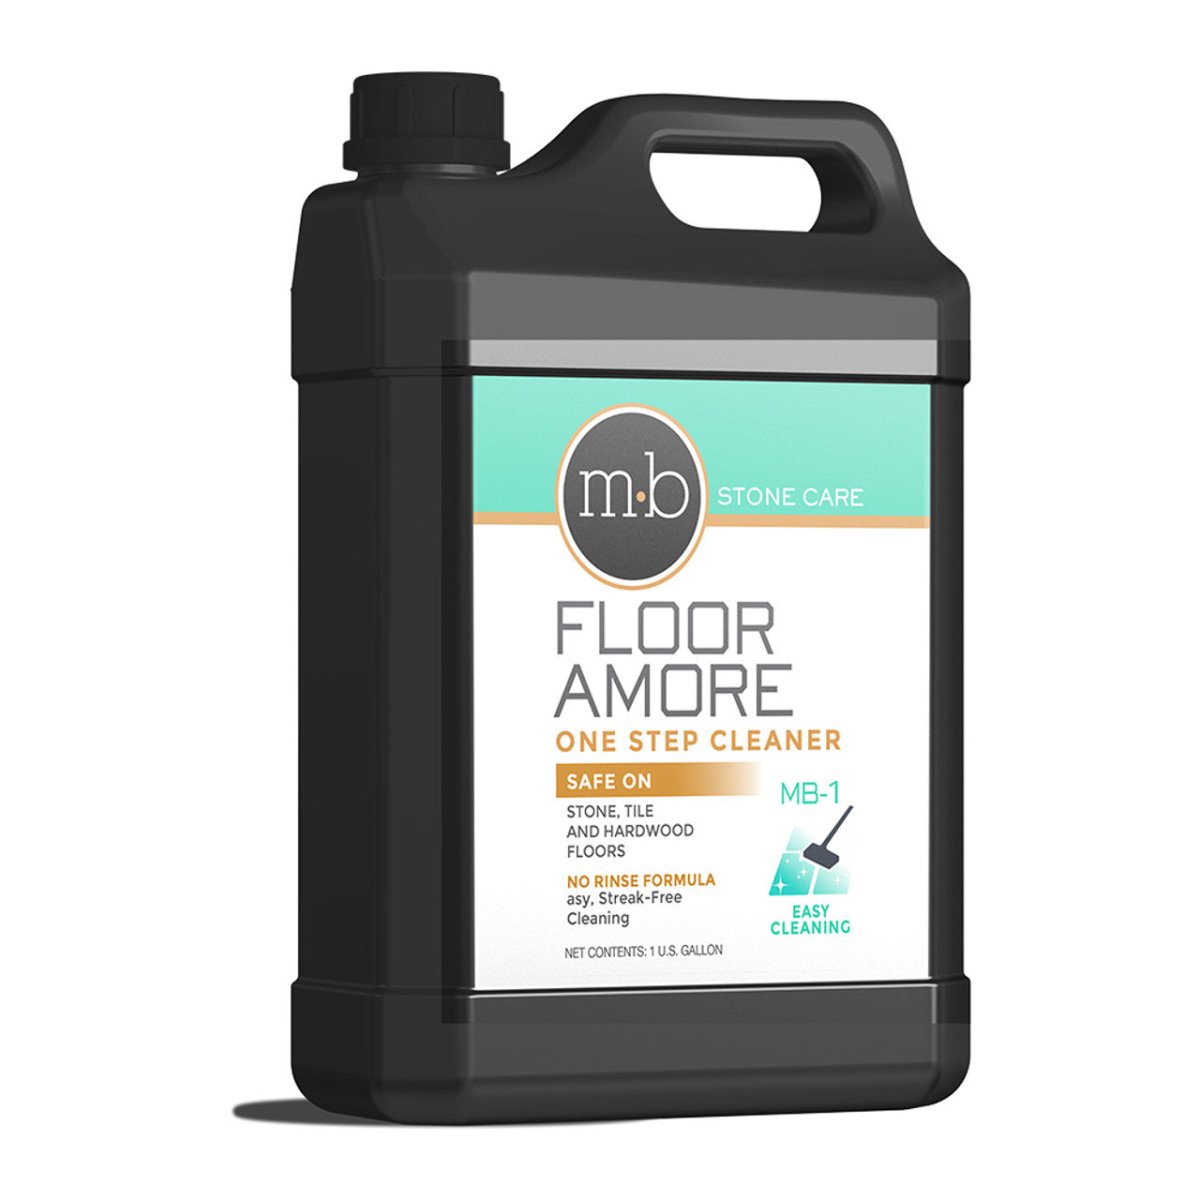 MB-1 Floor Amore - MB Stone Care